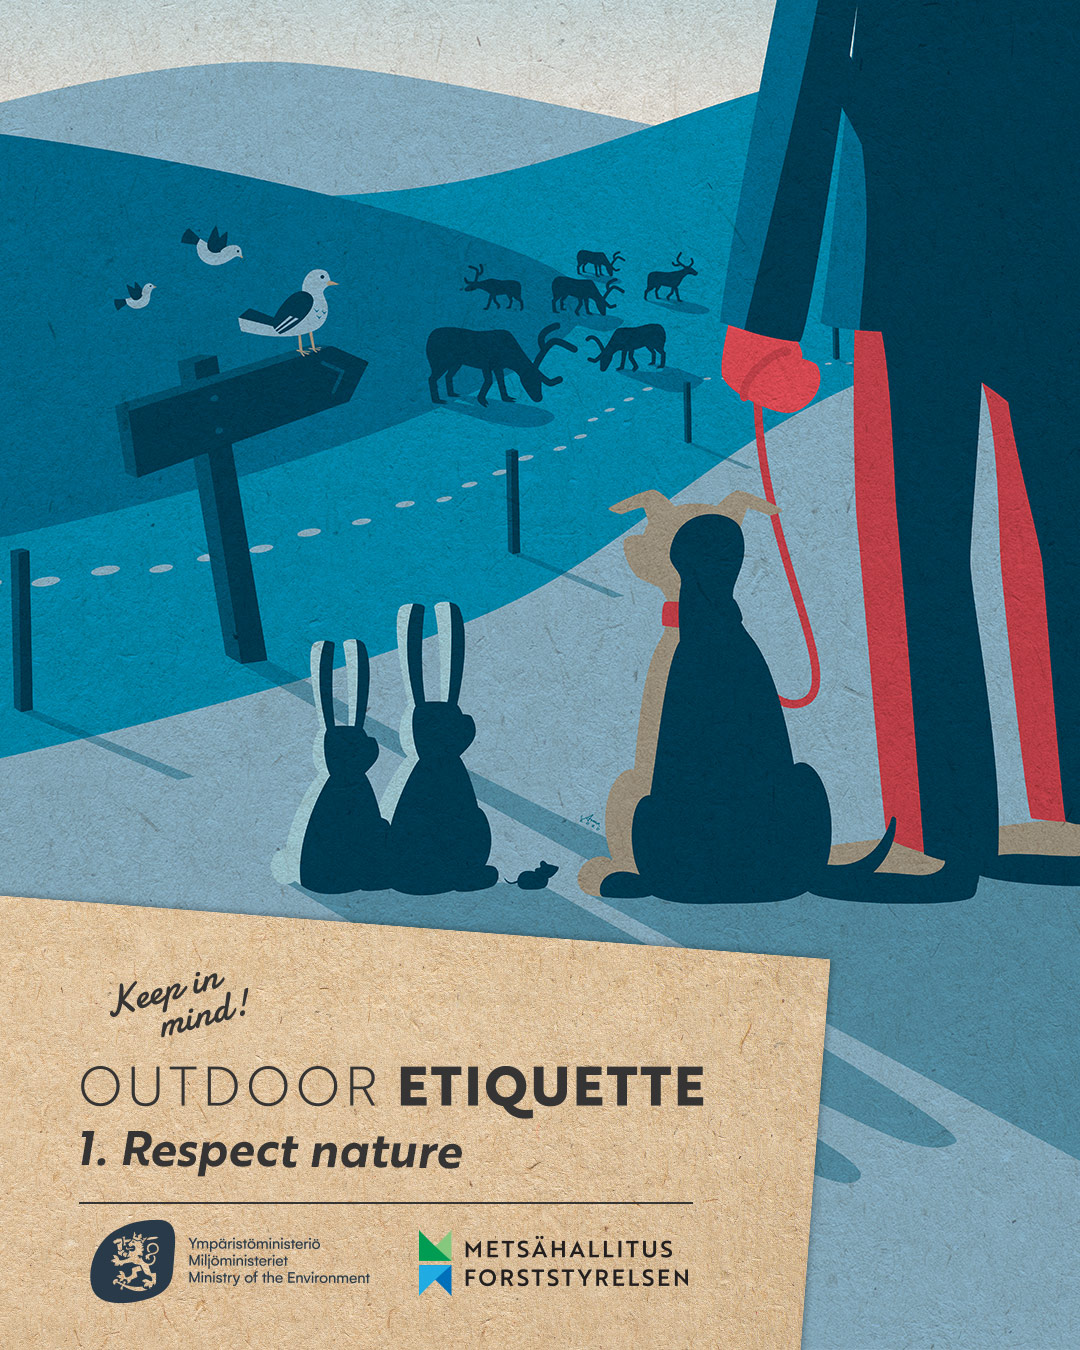 A person with a dog in nature and the text at the bottom: Outdoor etiquette: 1. Respect nature